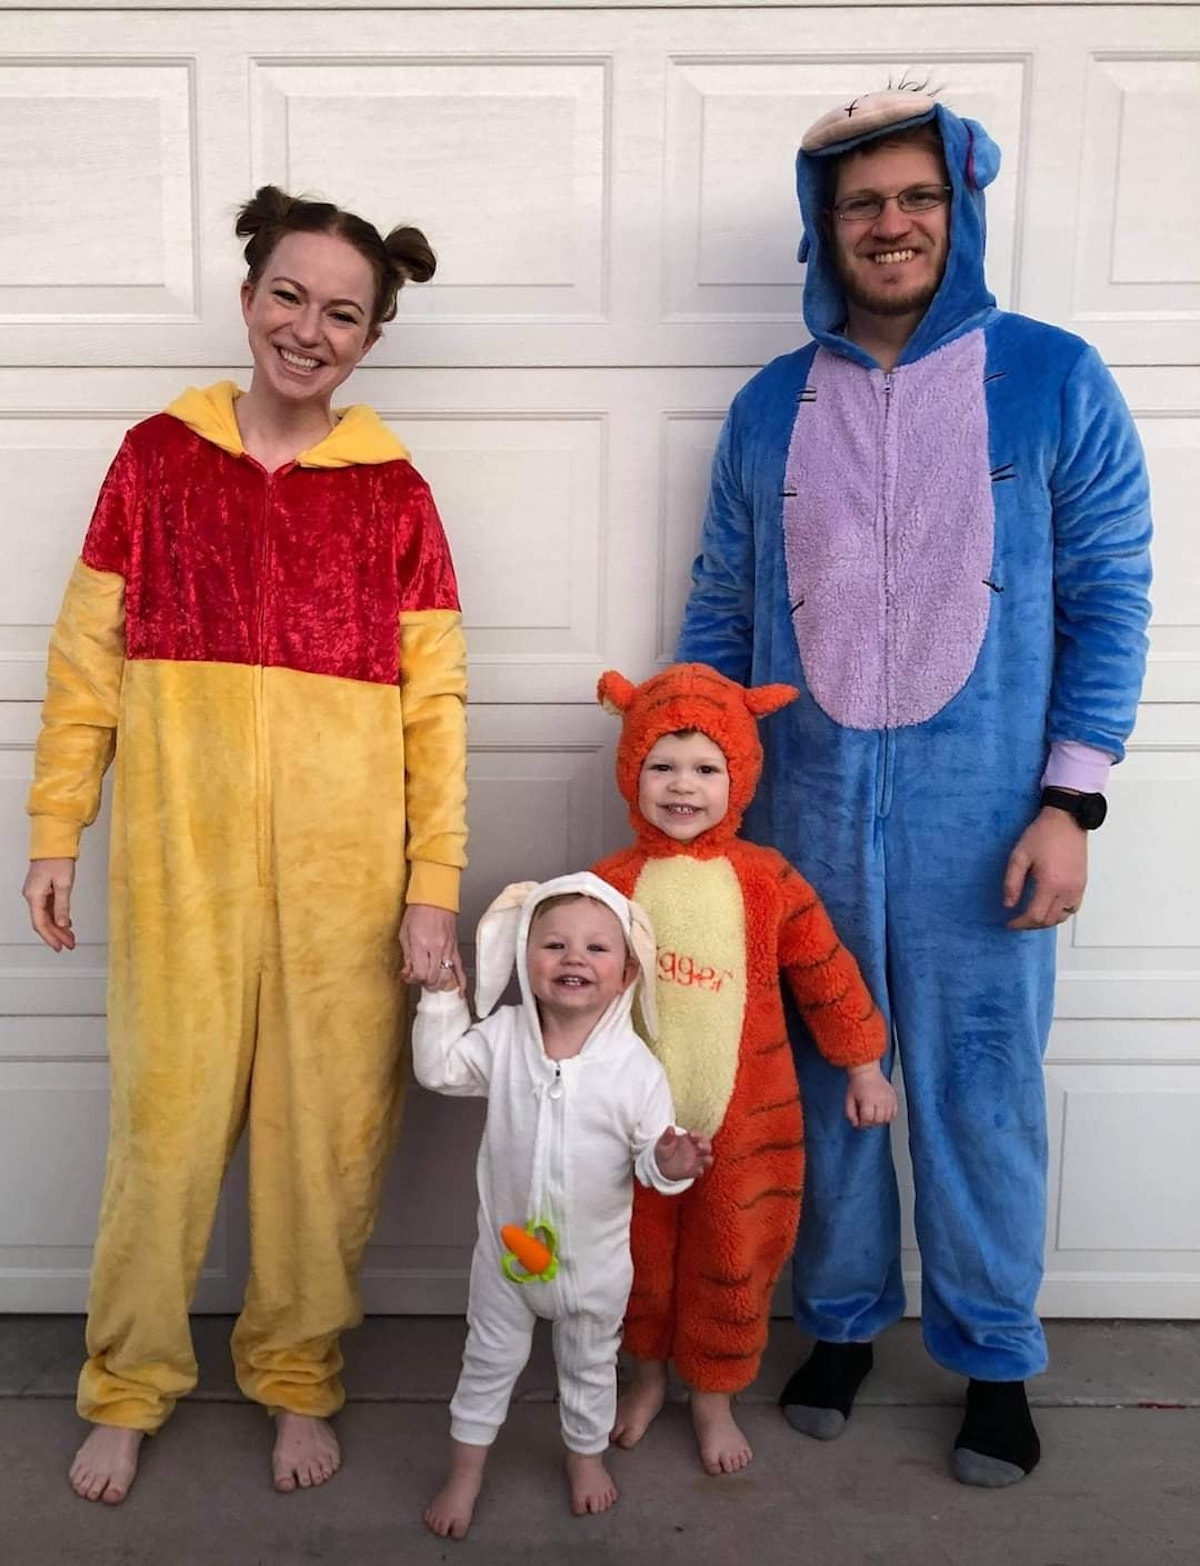 Family of 4 wearing Winnine the Pooh costumes.